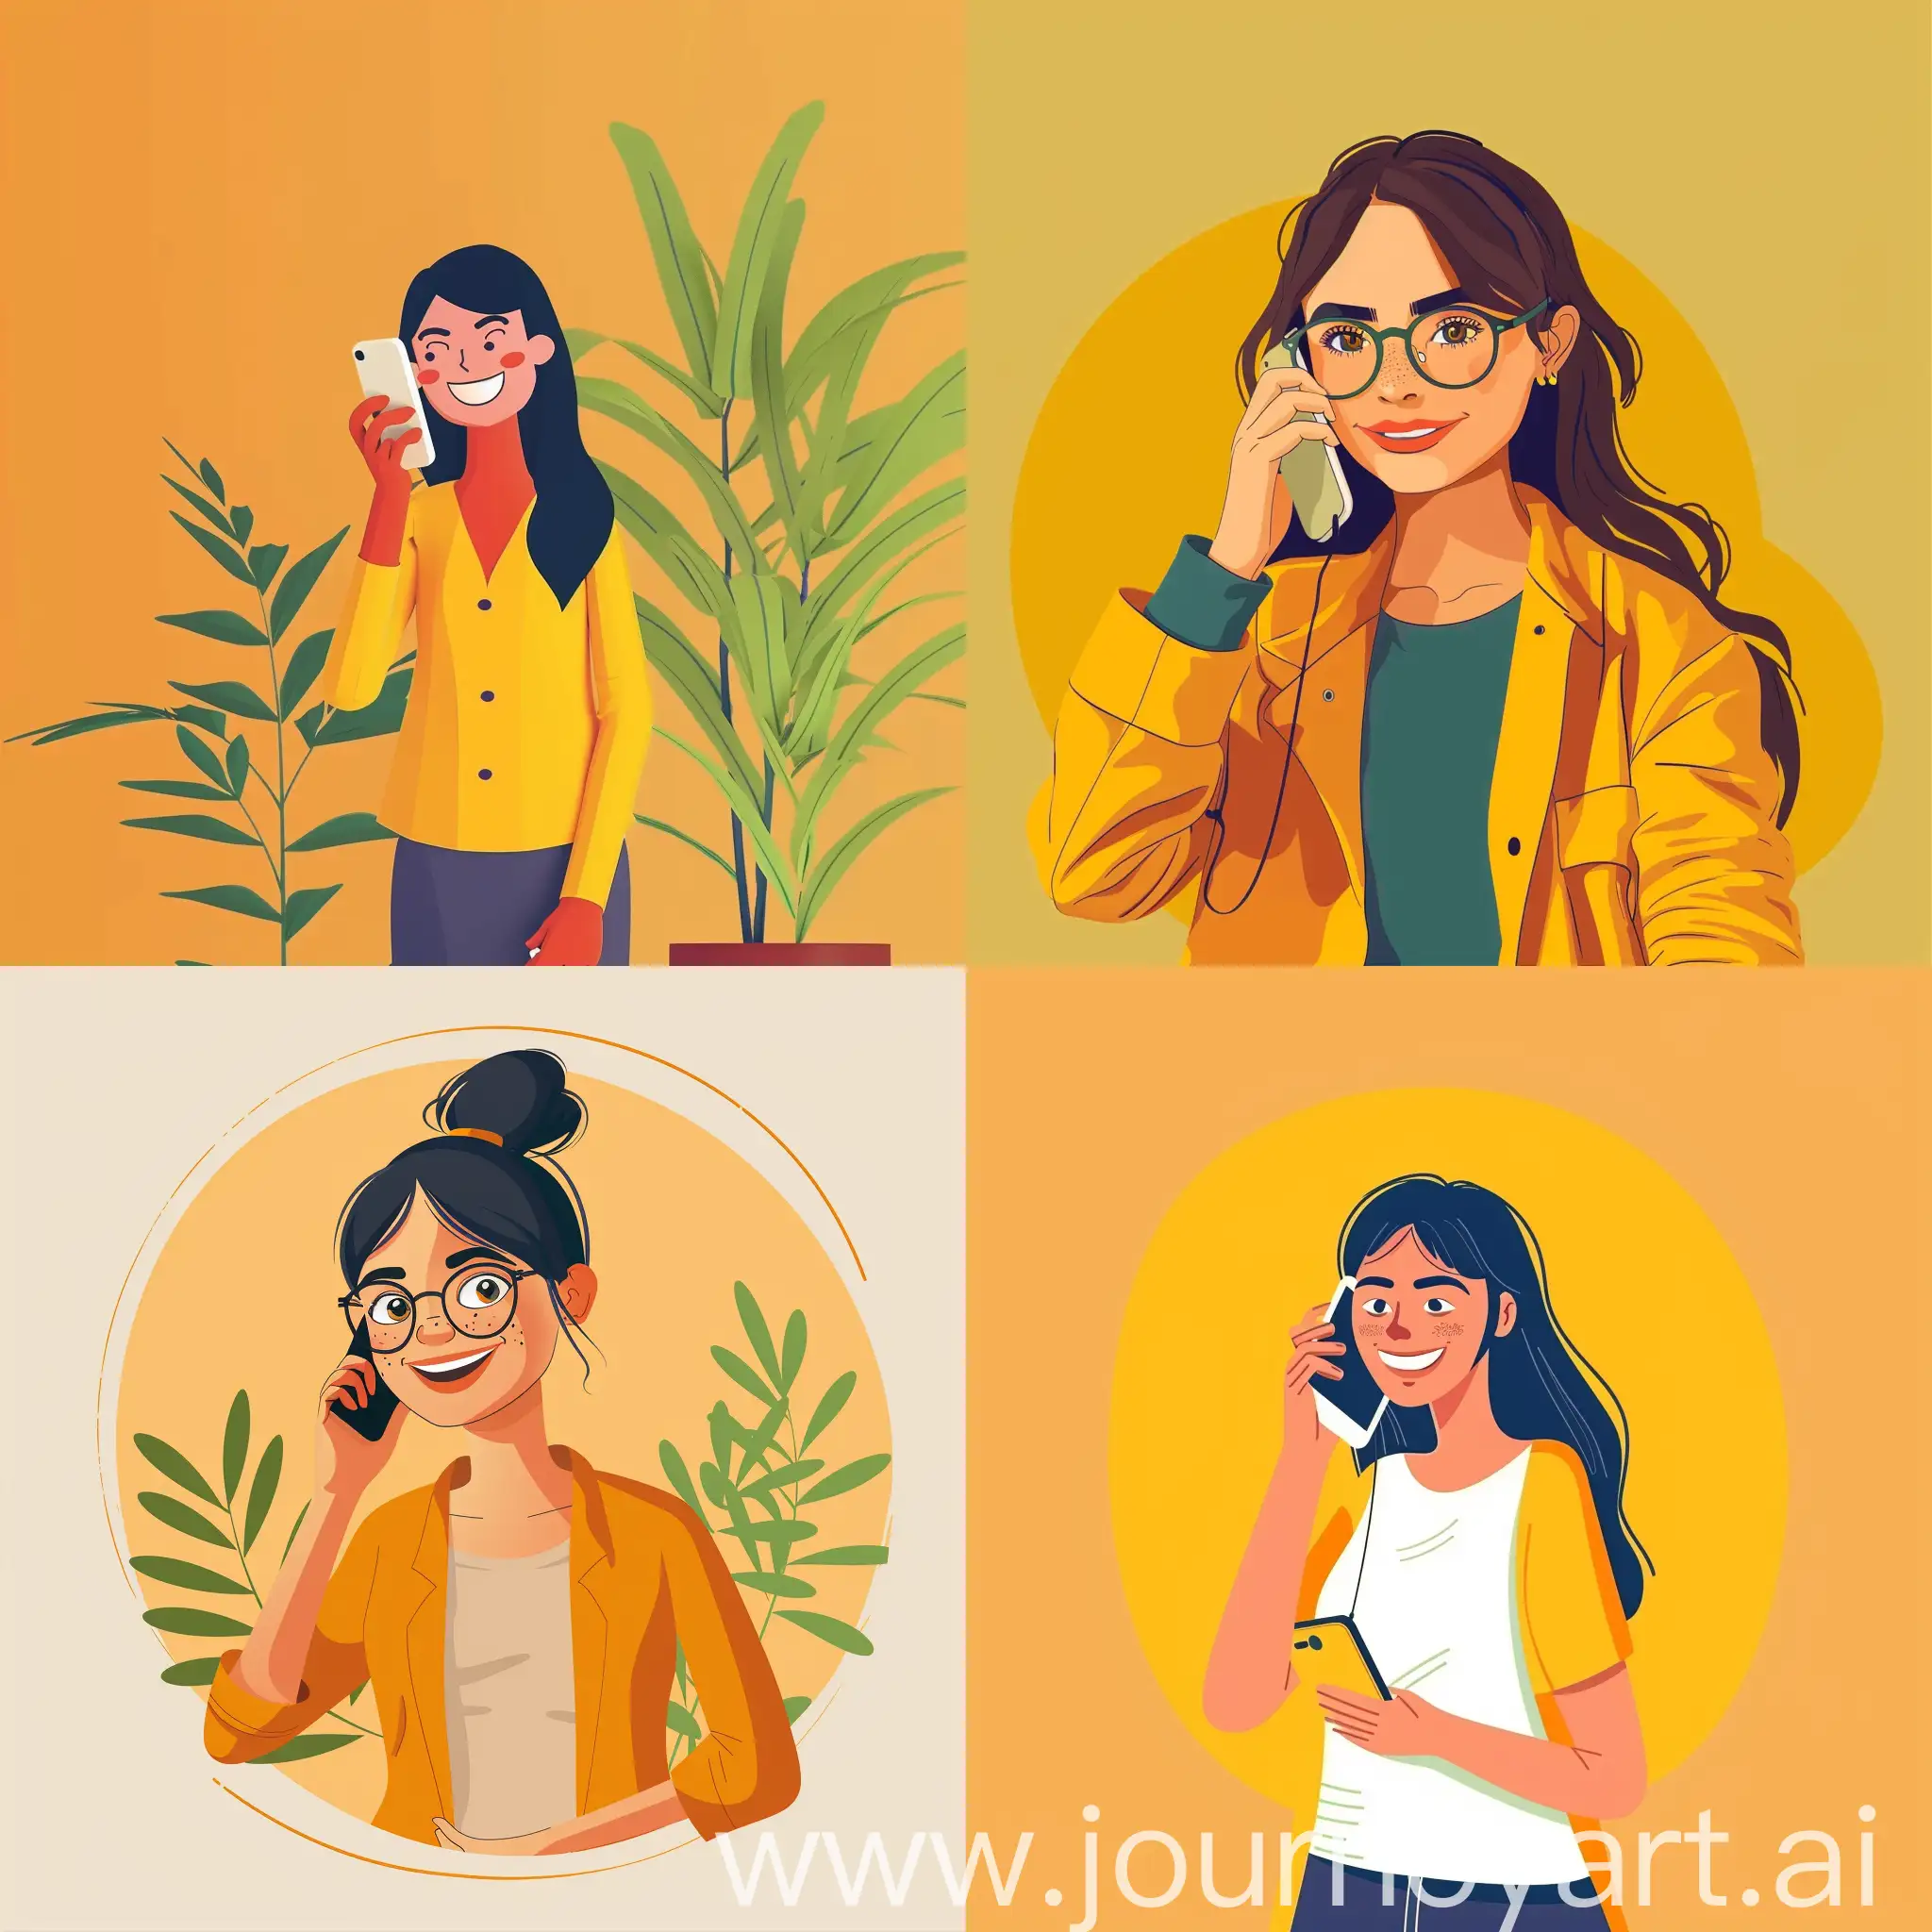 Smiling-Woman-Engaged-in-Phone-Conversation-Graphic-Poster-Design